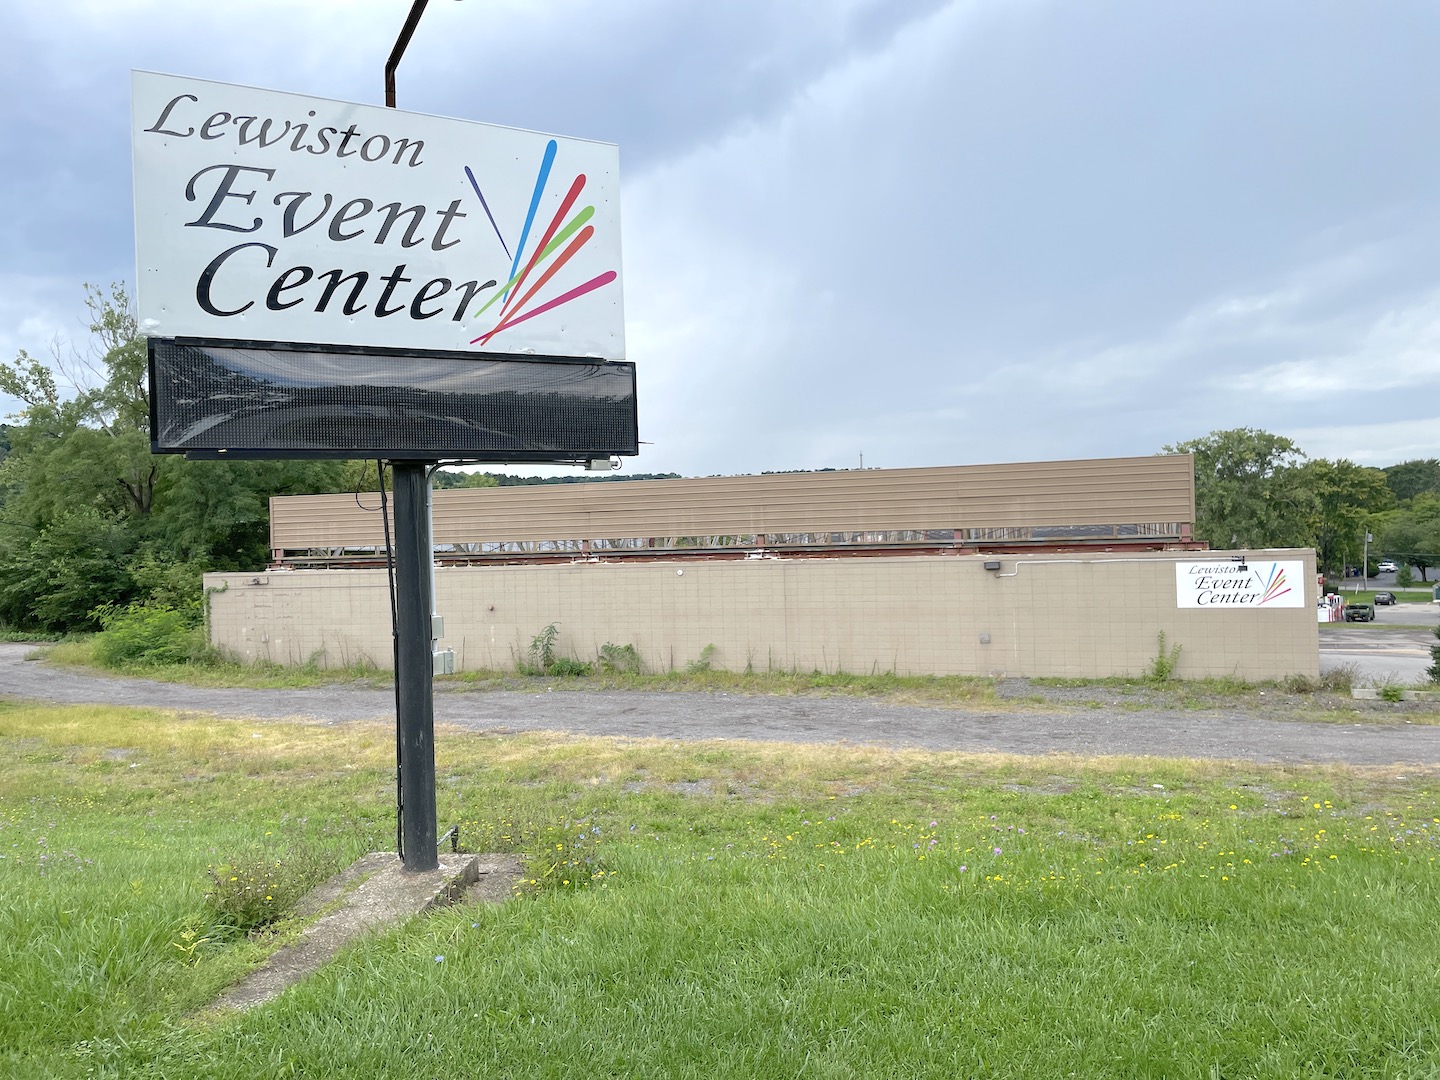 The Lewiston Event Center may be converted into a self-storage operation similar to the one located on Military Road (at the former Kmart site).